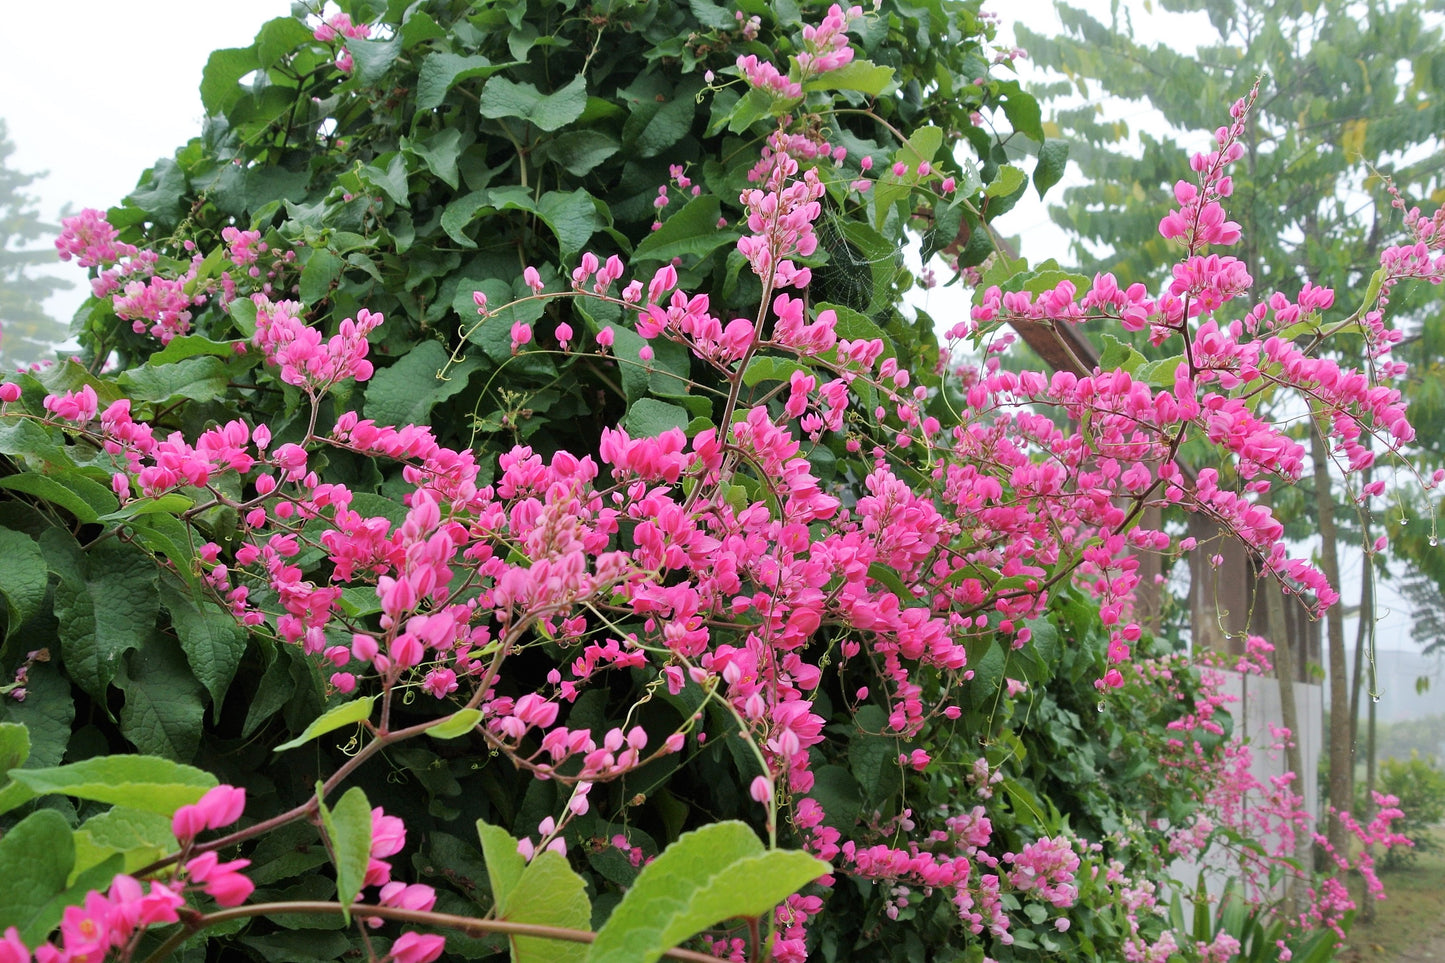 5 CORAL VINE Mexican Creeper Bee Bush Chain of Love Mountain Rose Antigonon Leptopus Bright Pink Climber Ground Cover Flower Seeds